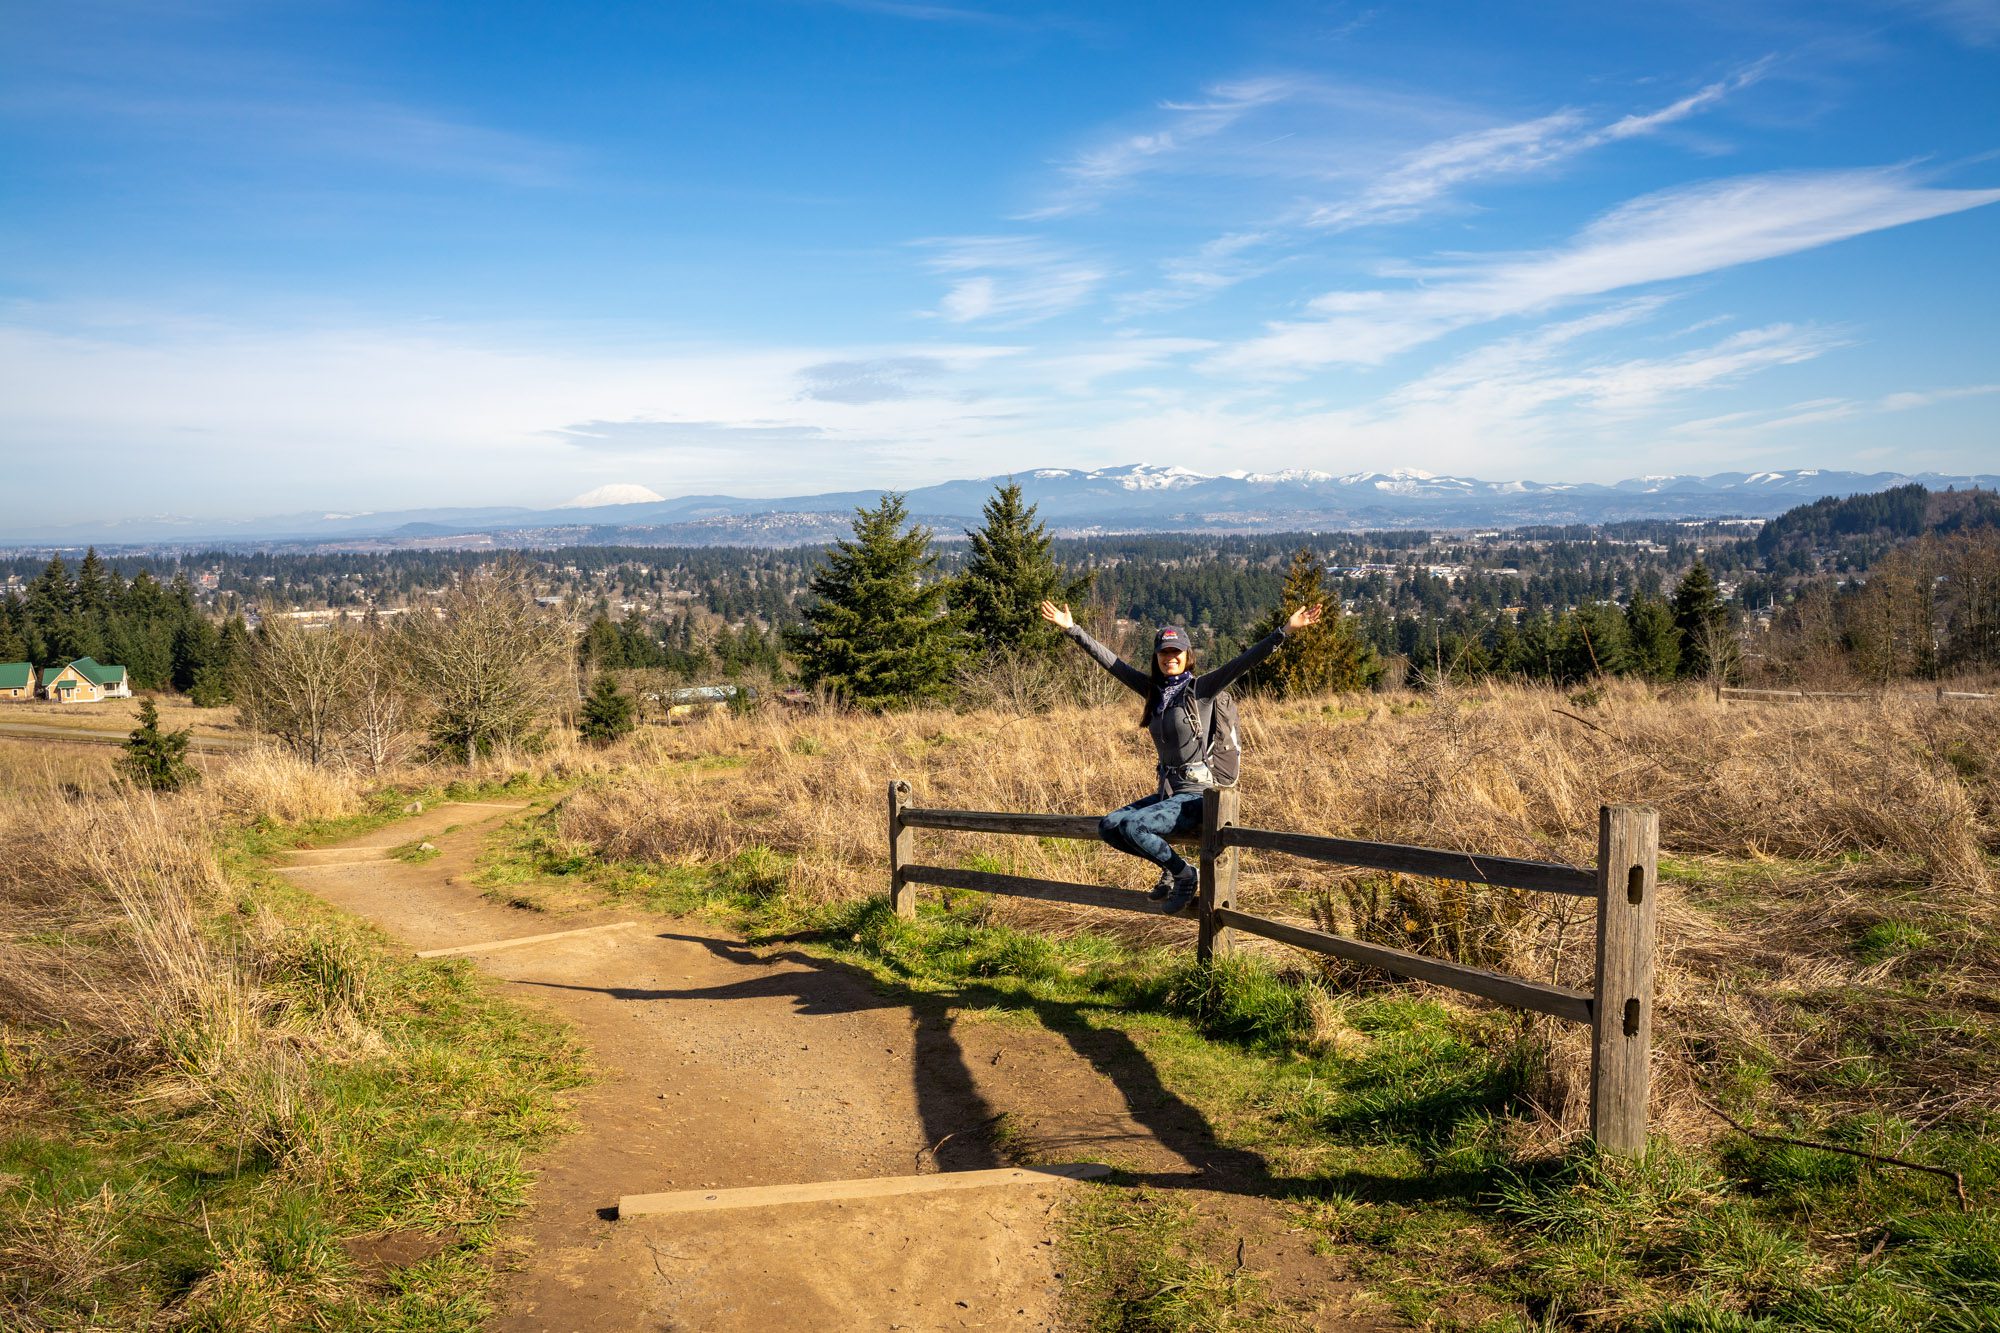 15 STUNNING Parks in Portland, Oregon (Local's Guide)